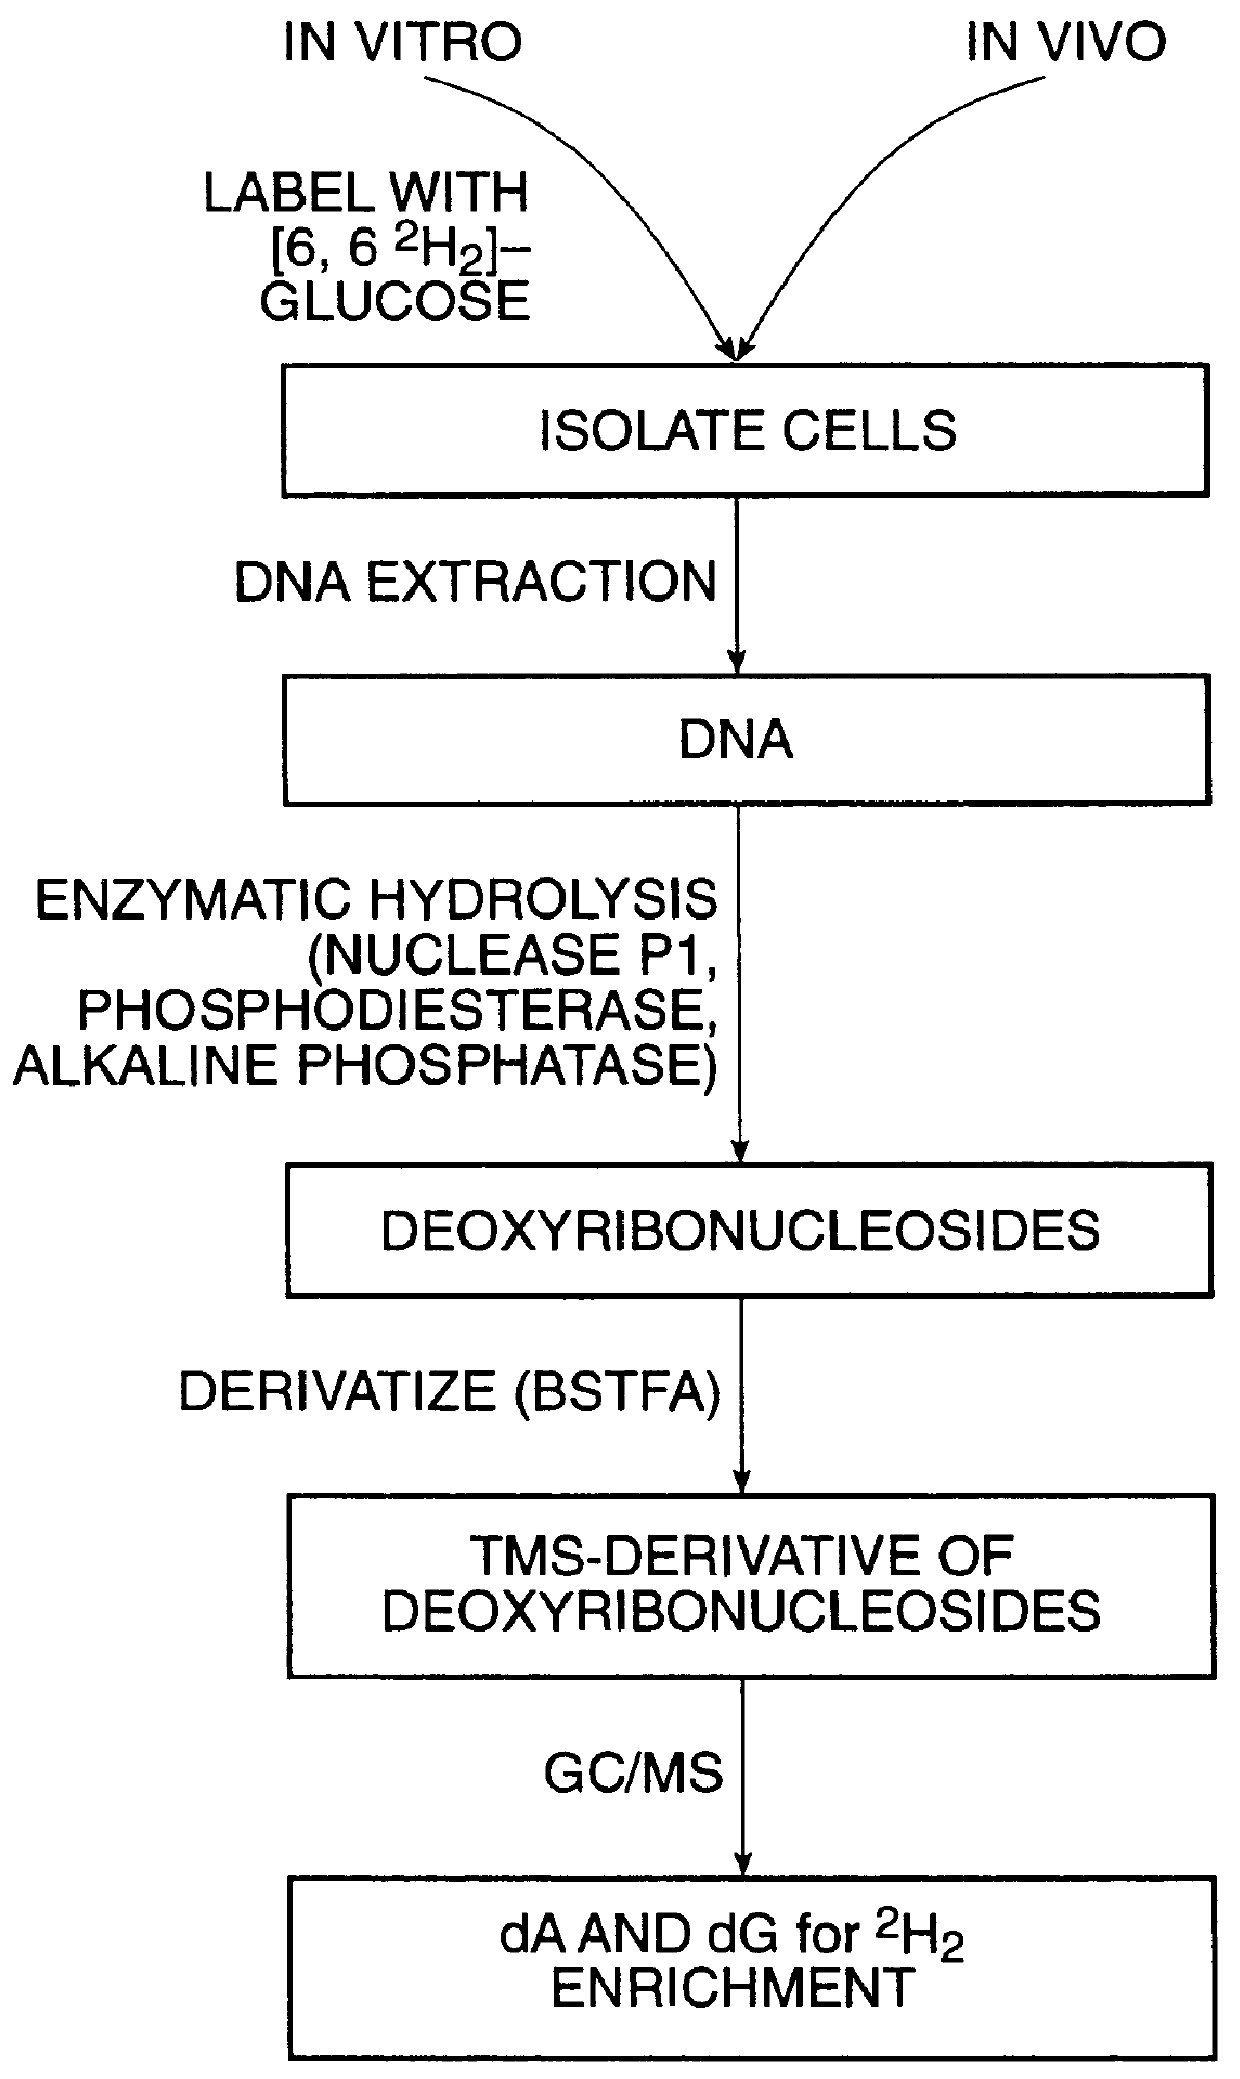 Methods for measuring cellular proliferation and destruction rates in vitro and in vivo